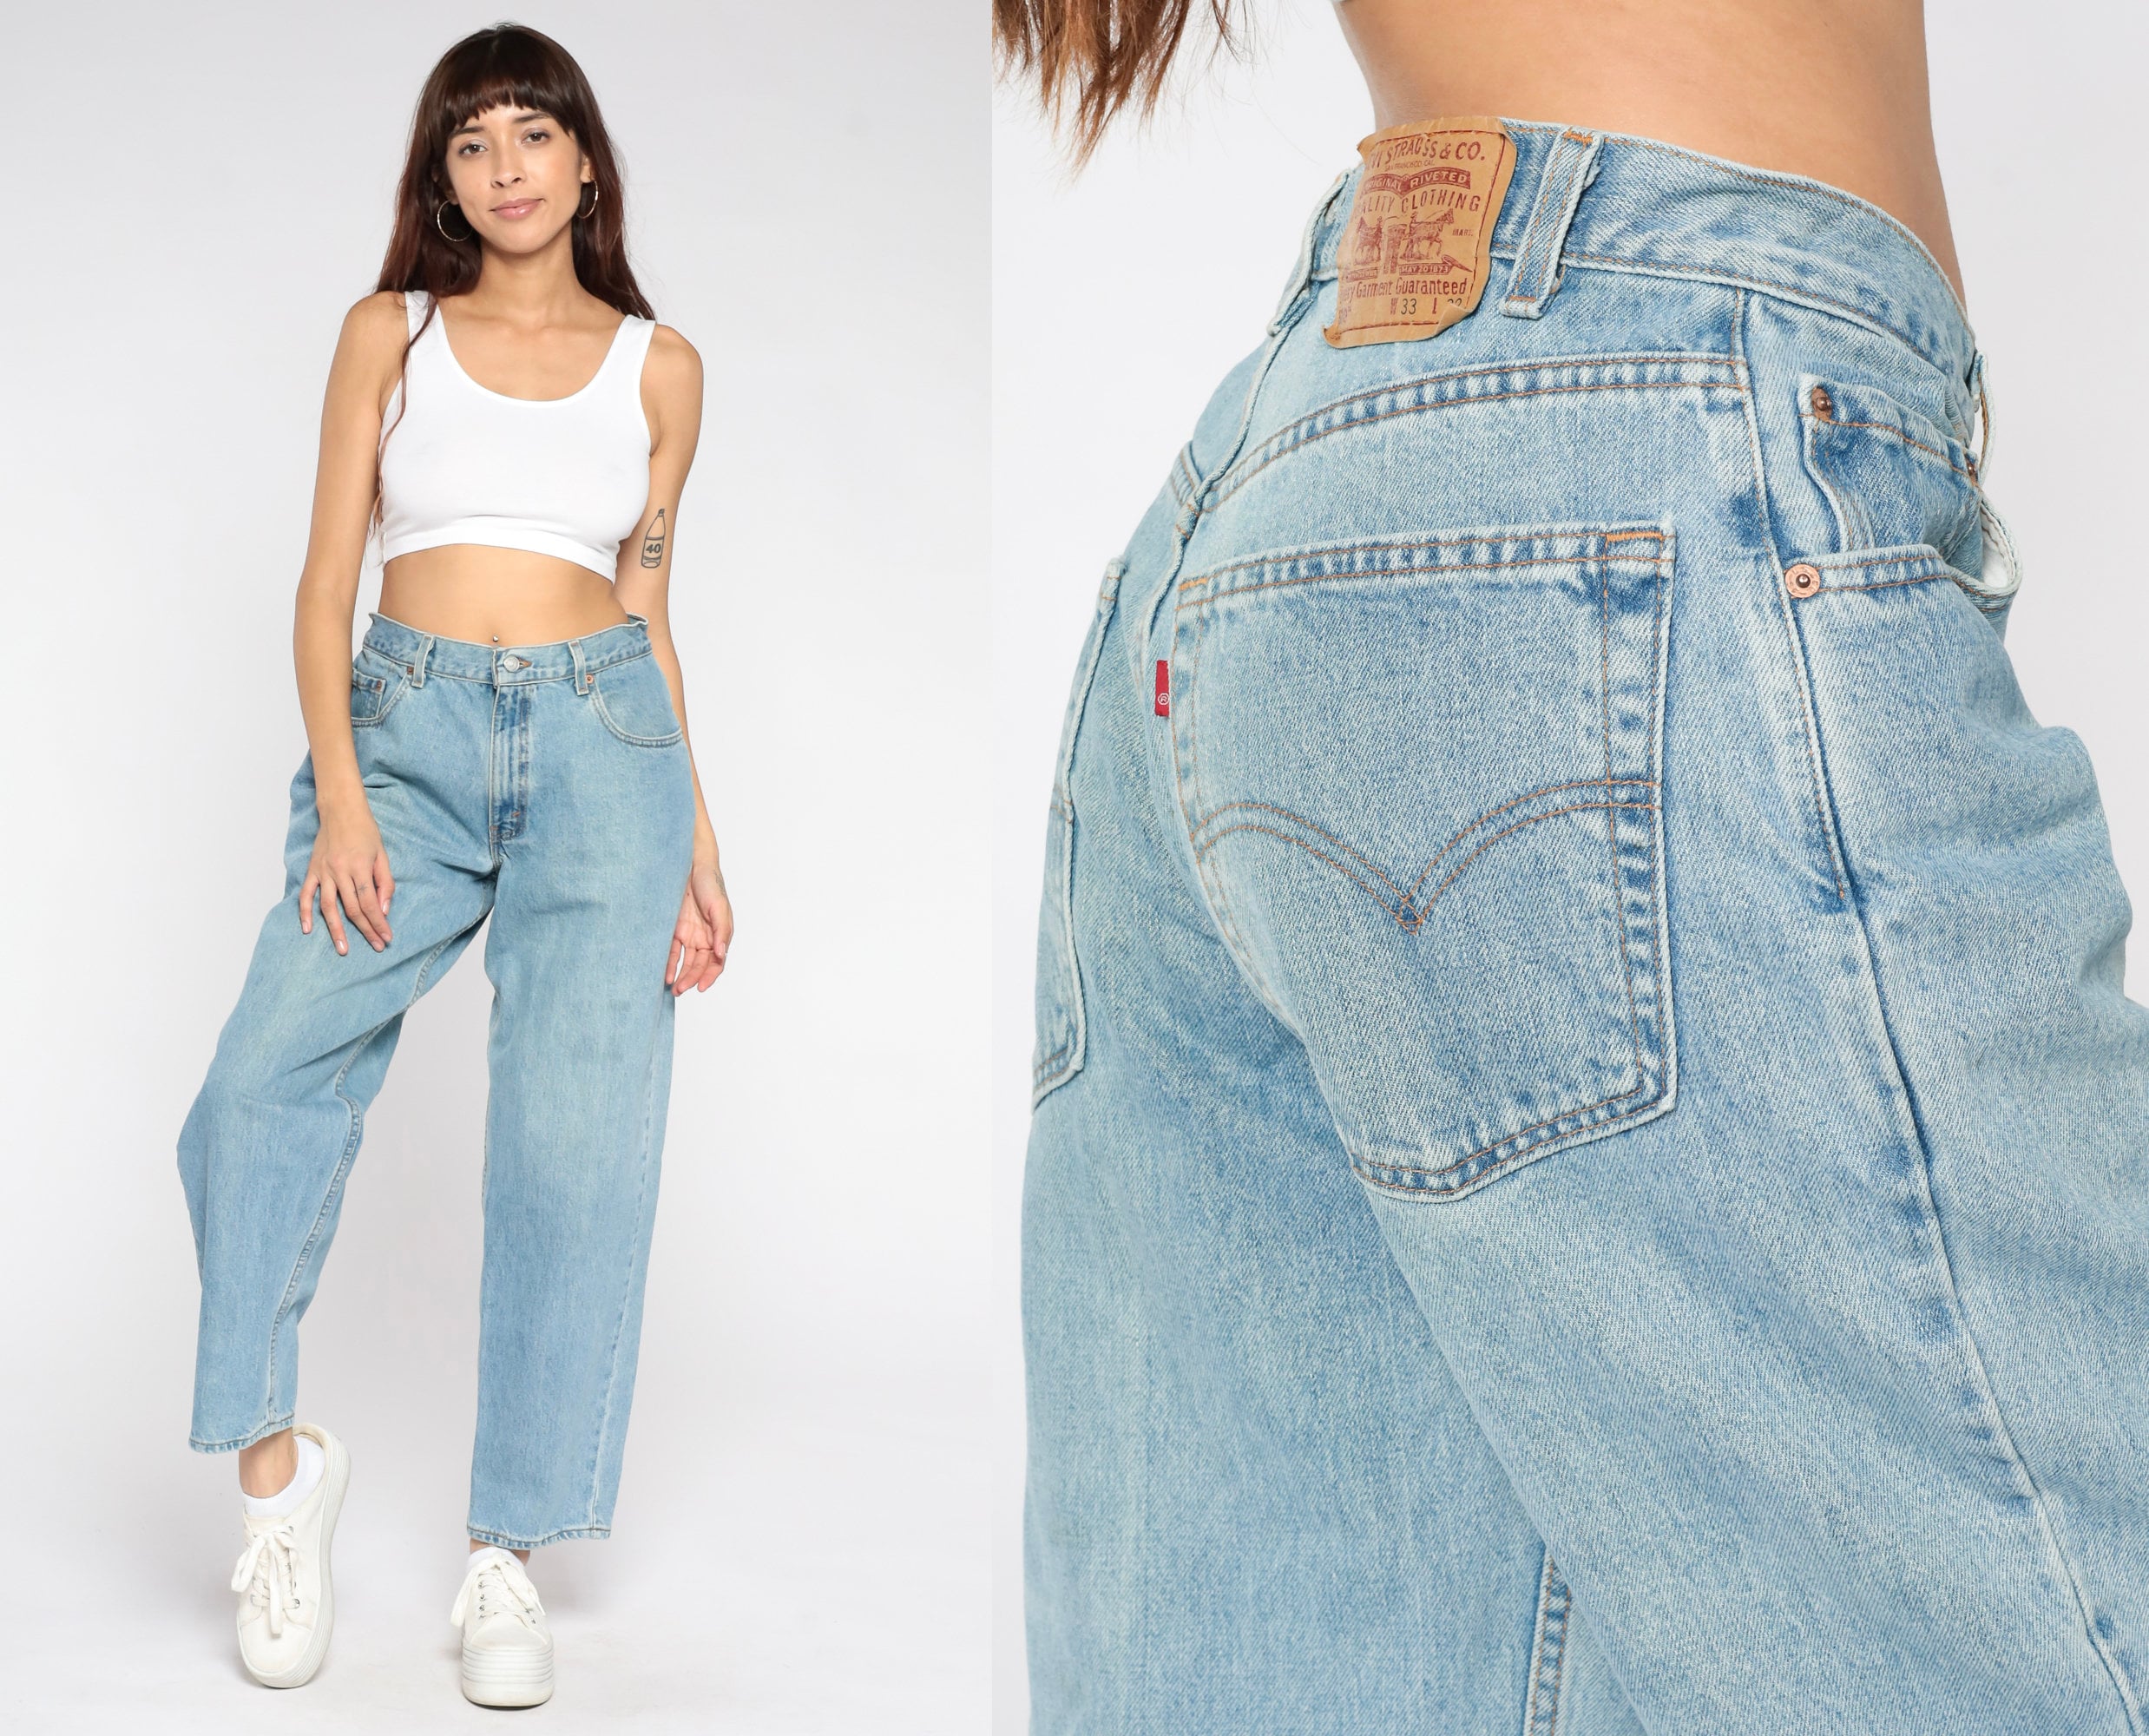 Levis Boyfriend Jeans 33 570 Relaxed Jeans High Waist Baggy - Etsy